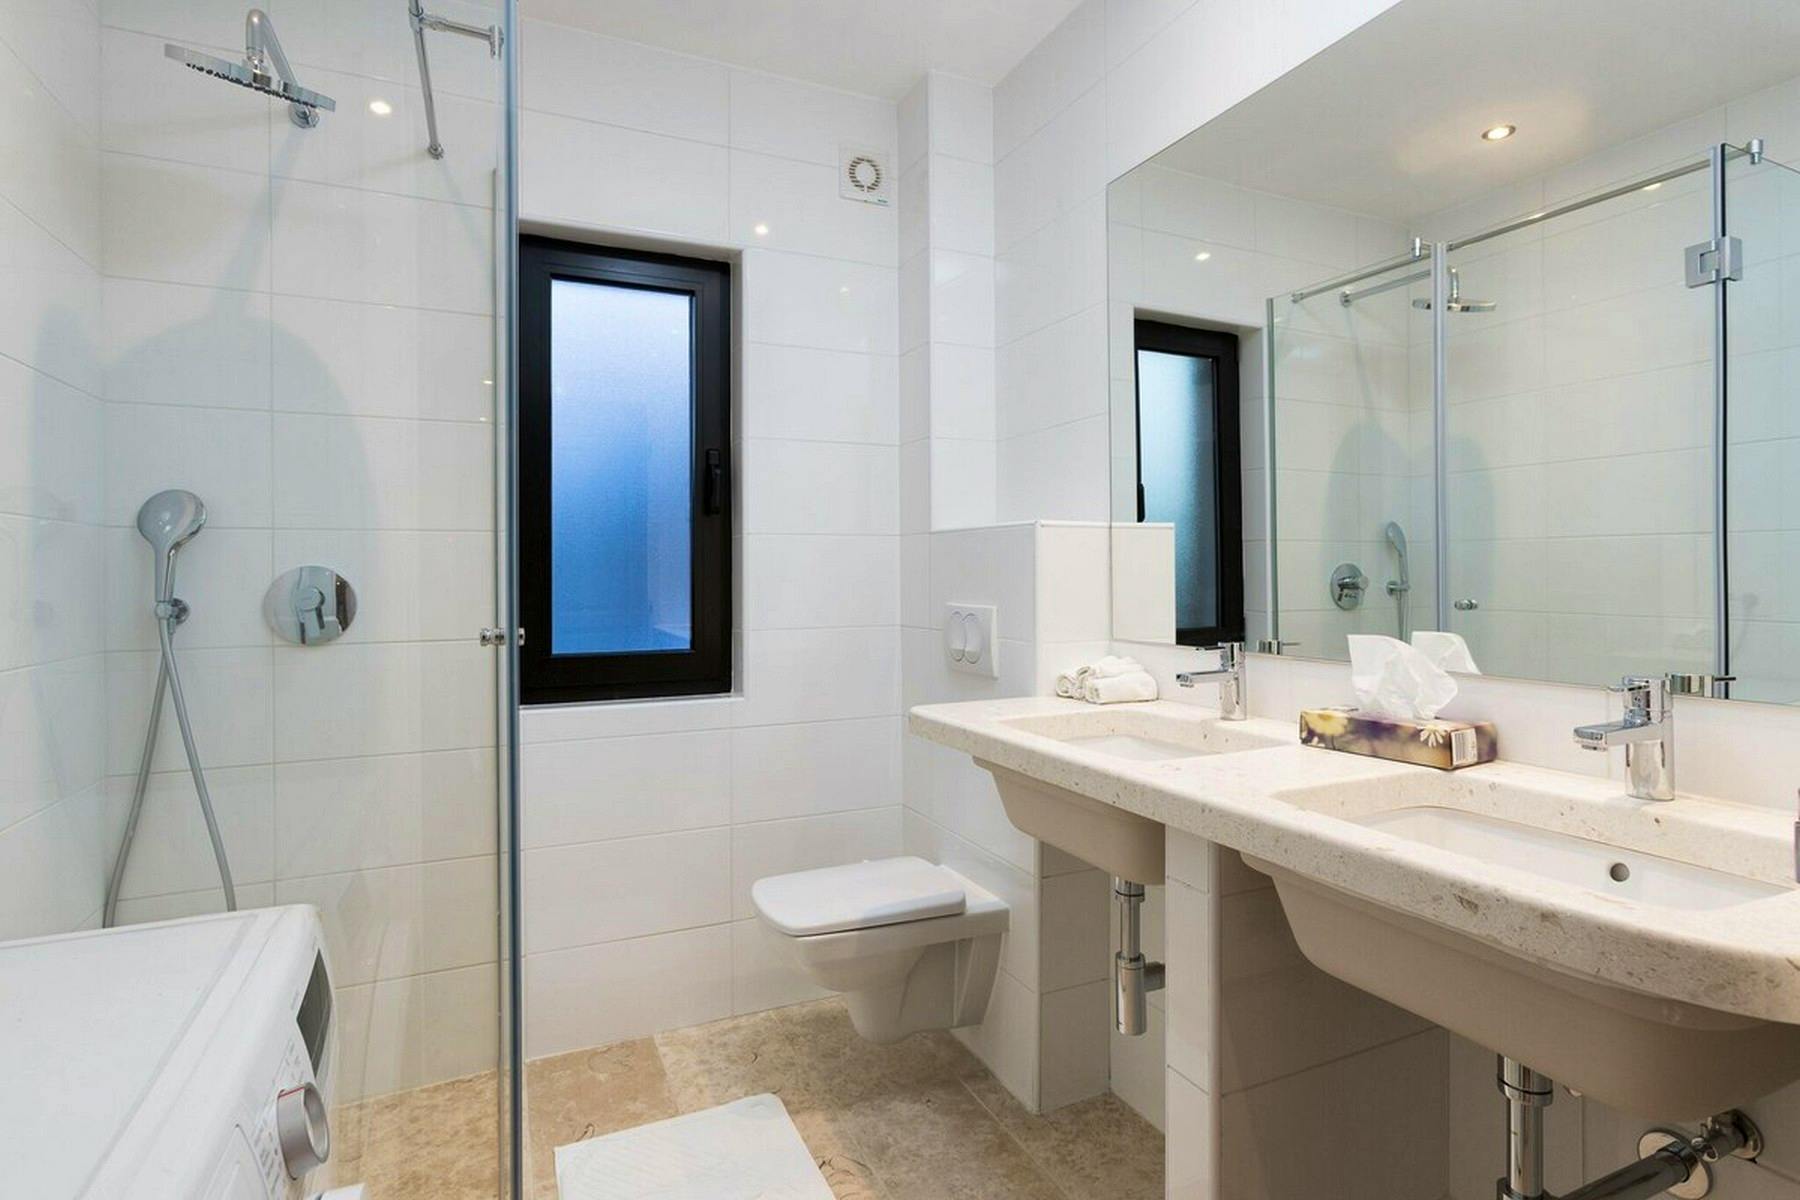 Bathroom with double sink and walk-in shower